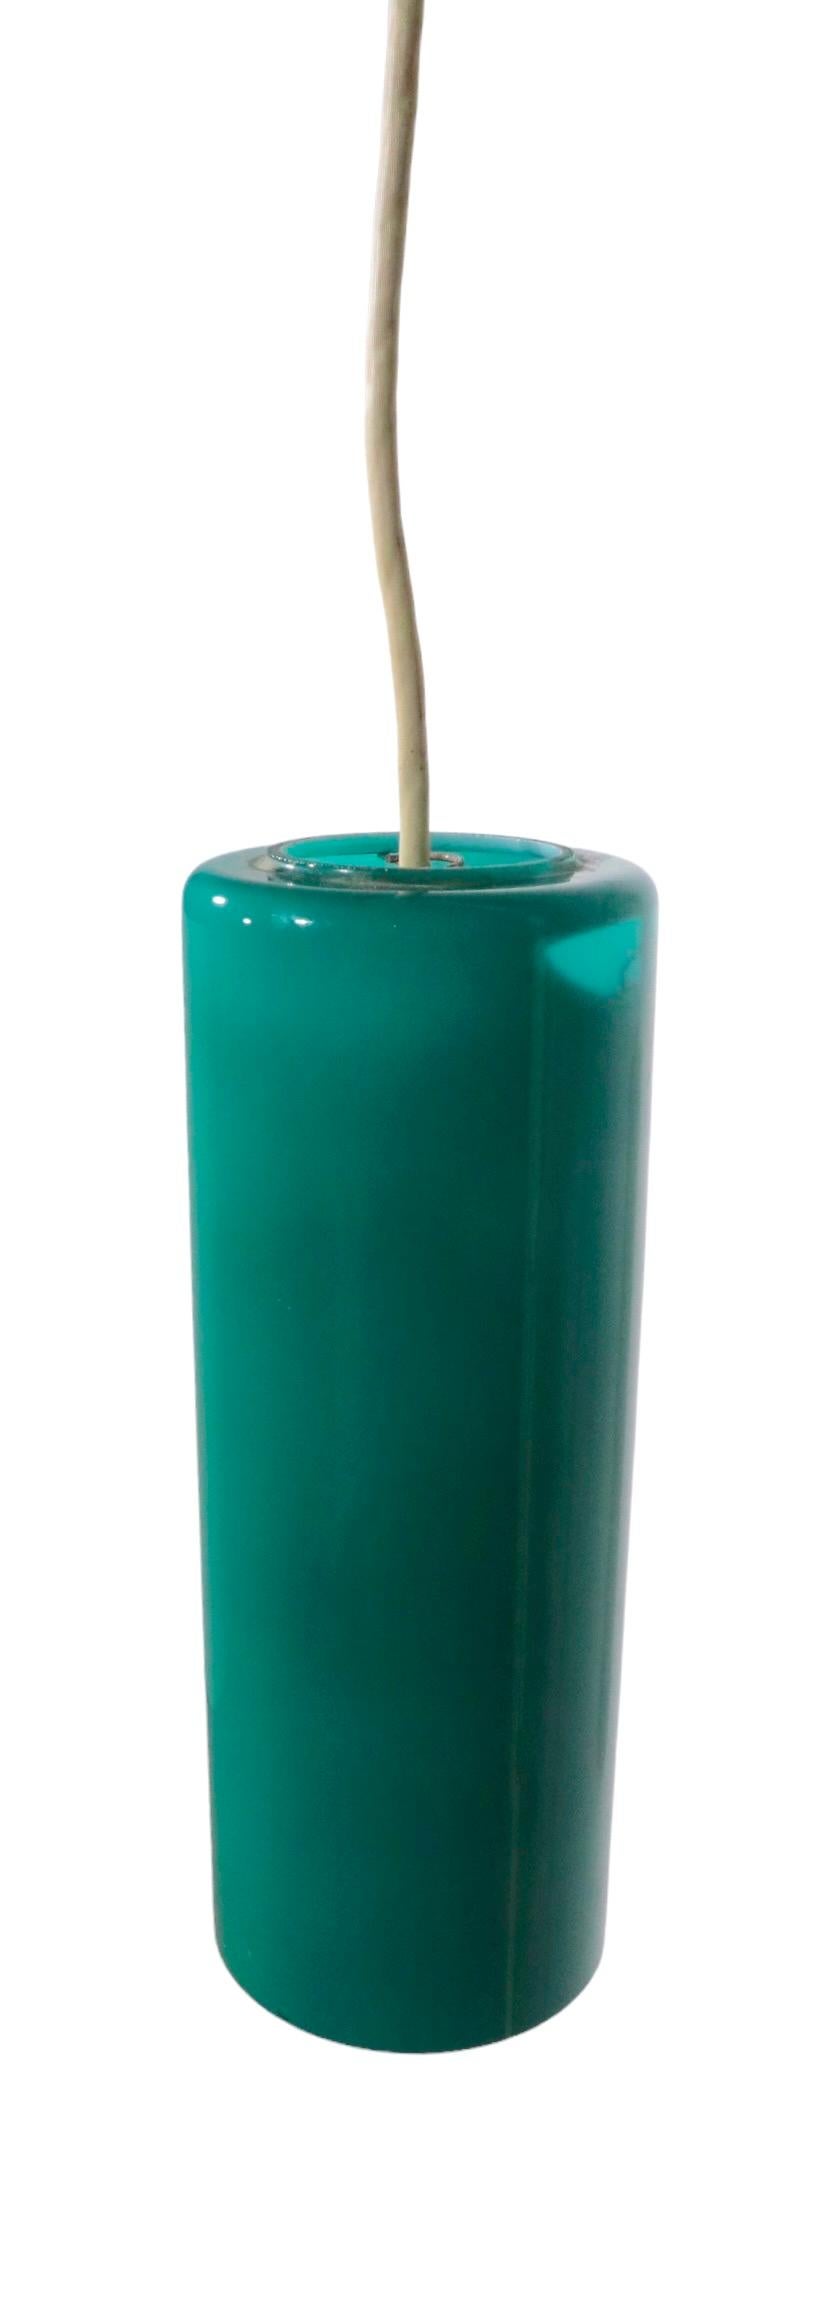 Prescolite Cylinder Pendant Chandelier in Green Glass, C 1950 - 1970's For Sale 1